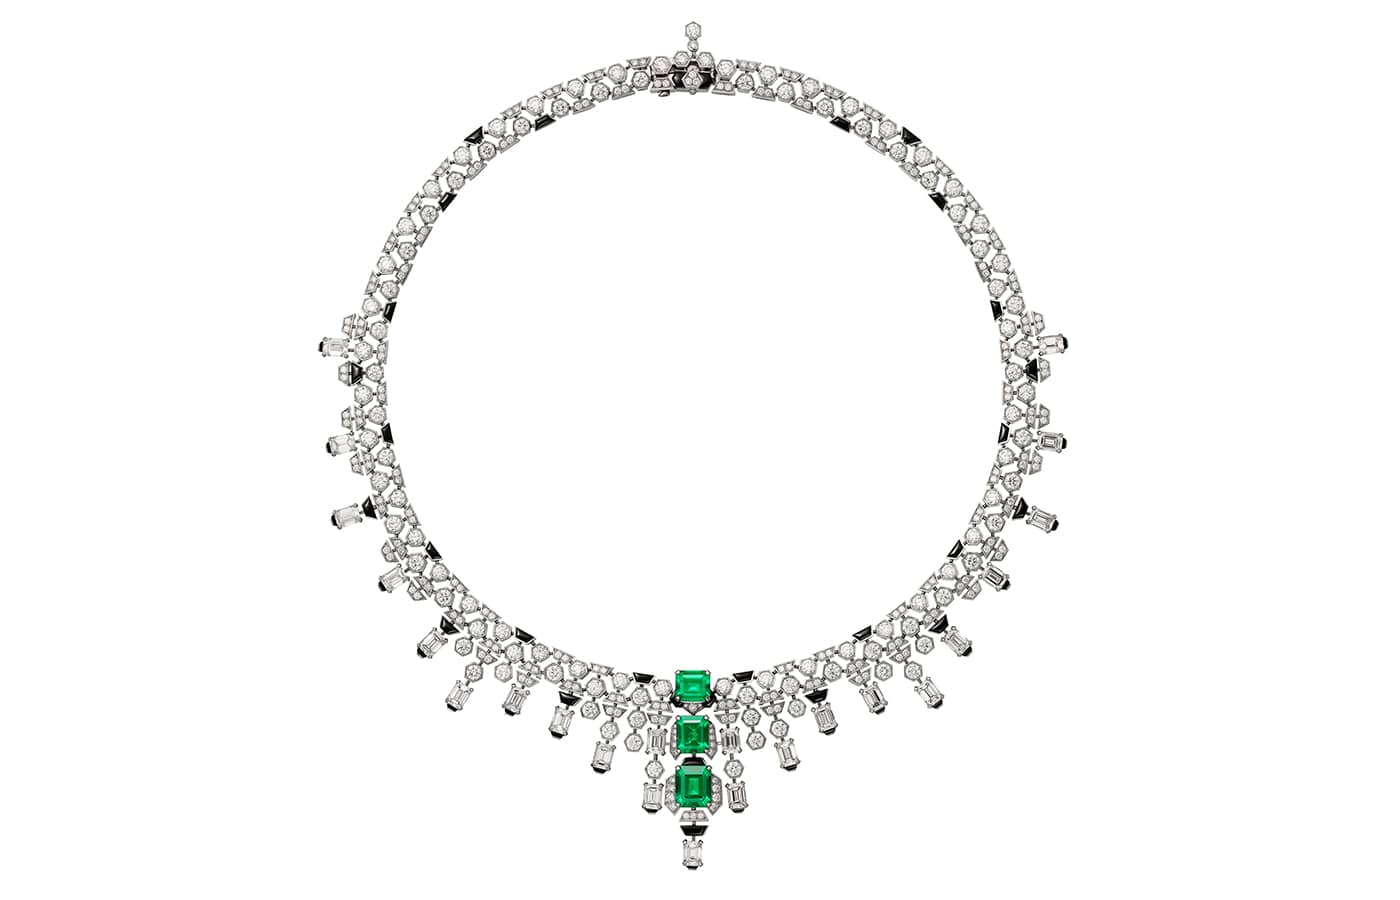 Cartier Celebrates the Allure of the Necklace at Paris Couture